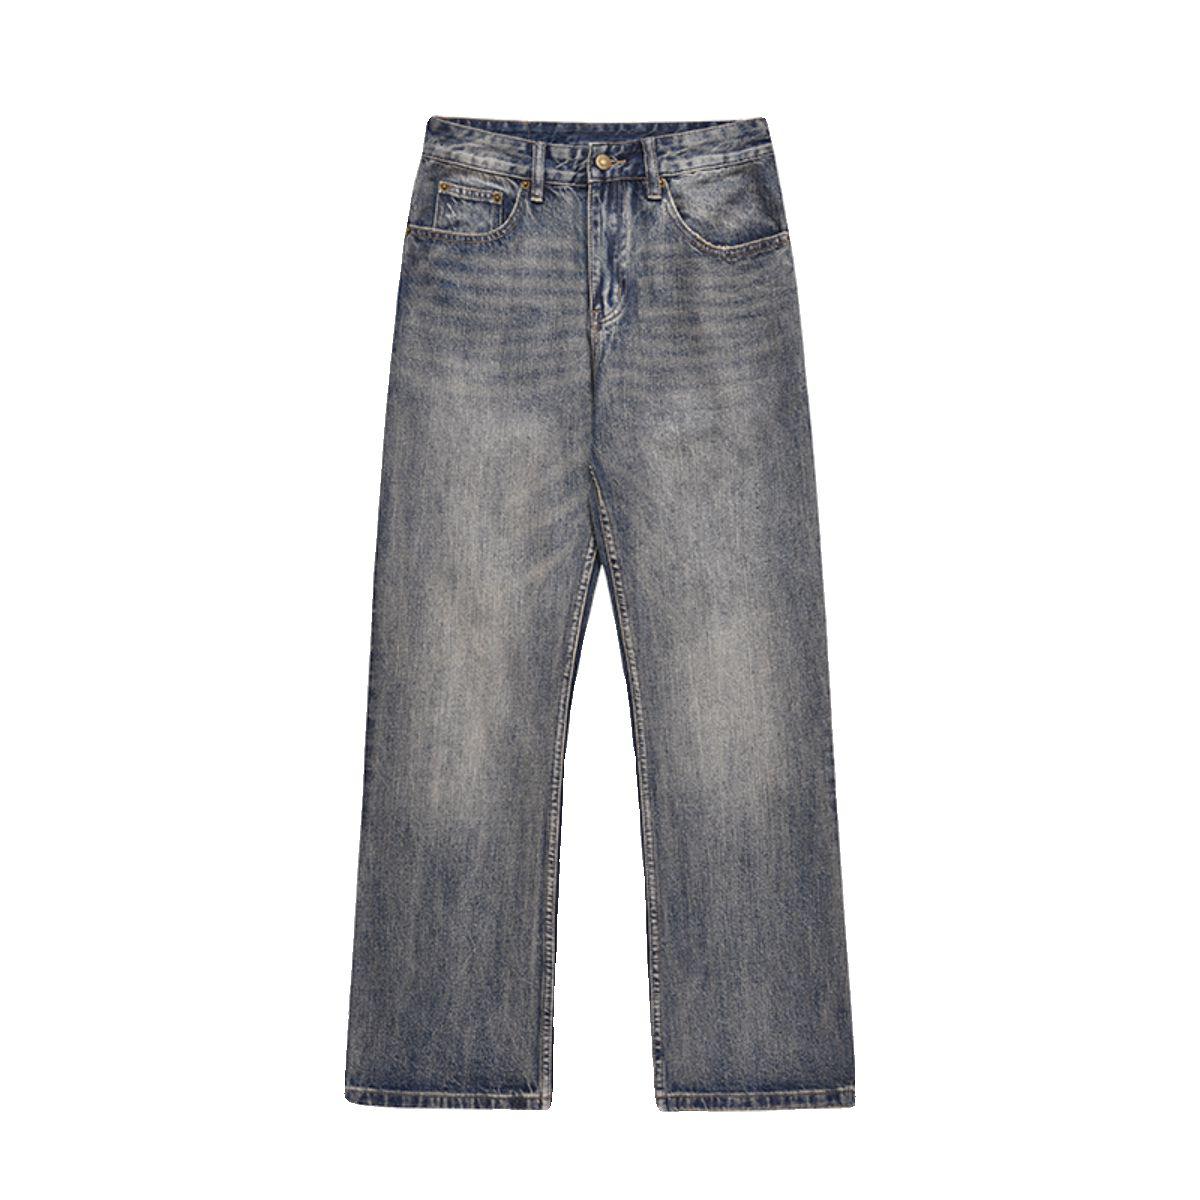 Classic Washed Vintage Jeans Korean Street Fashion Jeans By Mr Nearly Shop Online at OH Vault